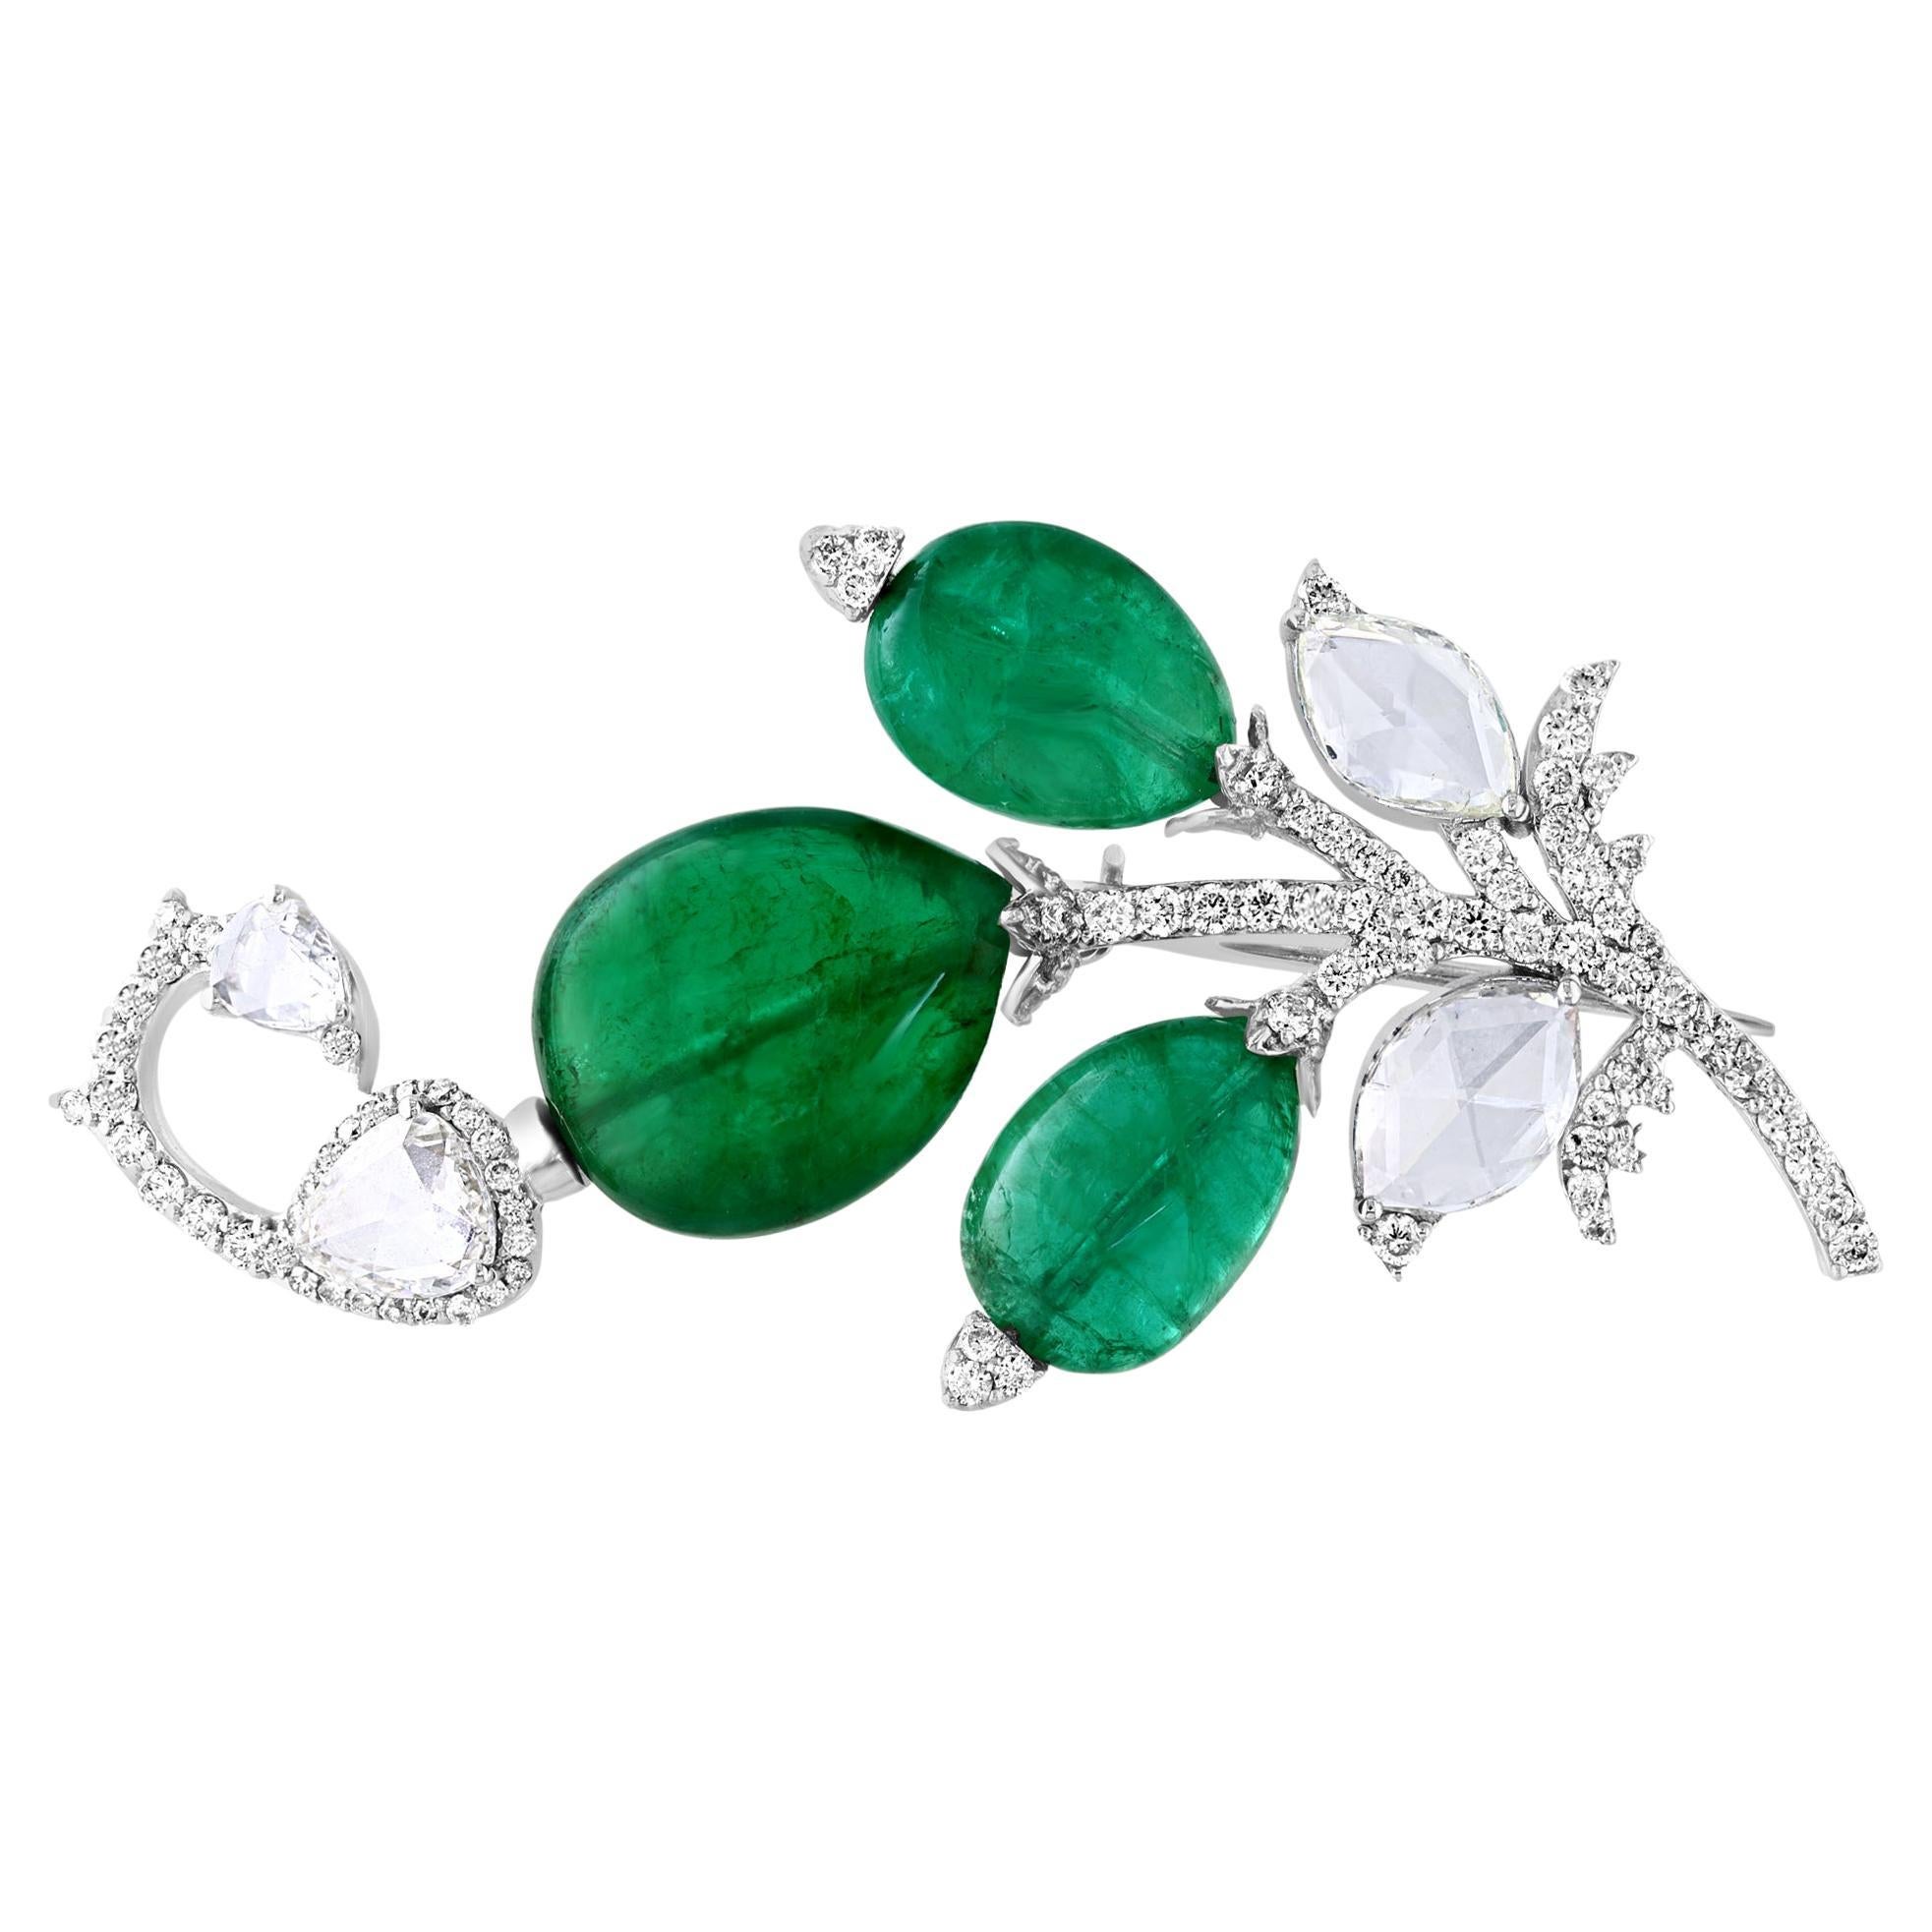 8.5 Ct Natural Oval Emerald Bead & 4 Ct Rose cut Diamond Brooch /Pin 18 Kt Gold For Sale